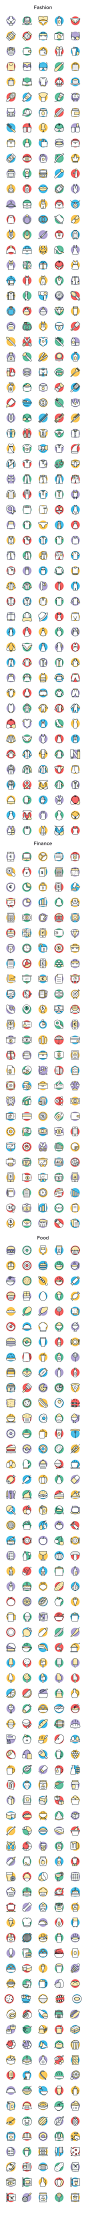 Cool icons3